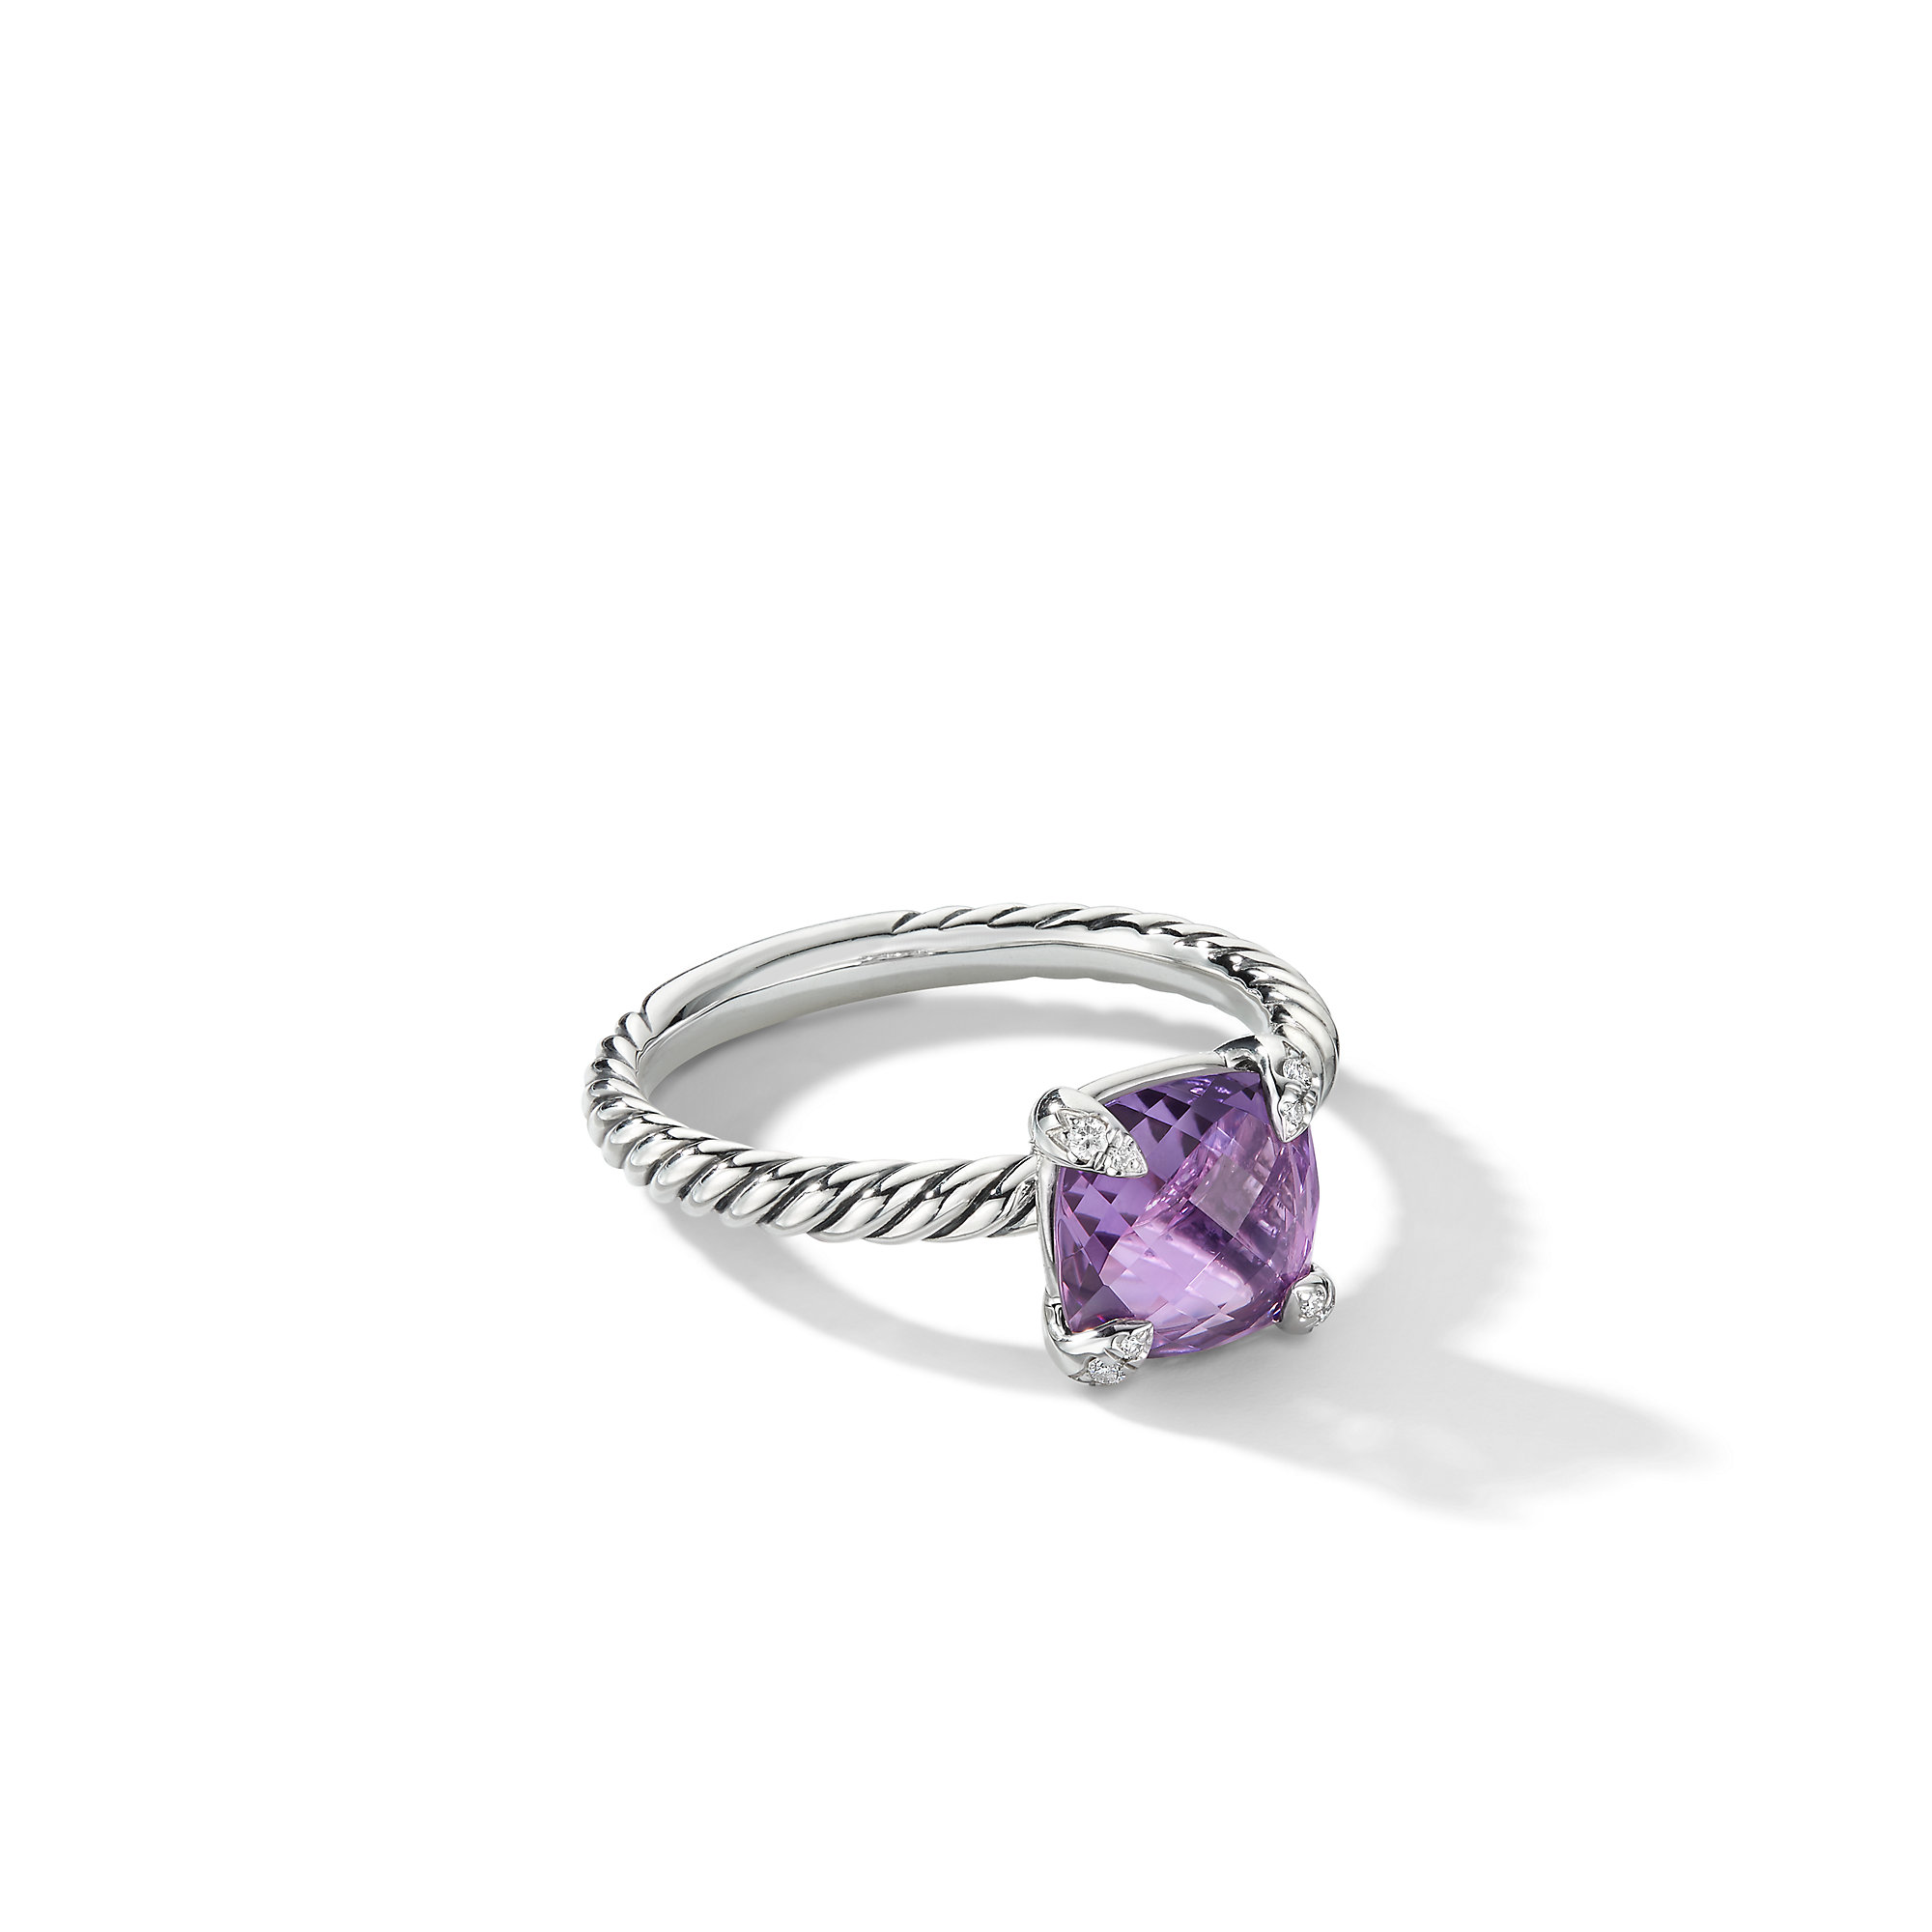 Chatelaine® Ring in Sterling Silver with Amethyst and Pave Diamonds